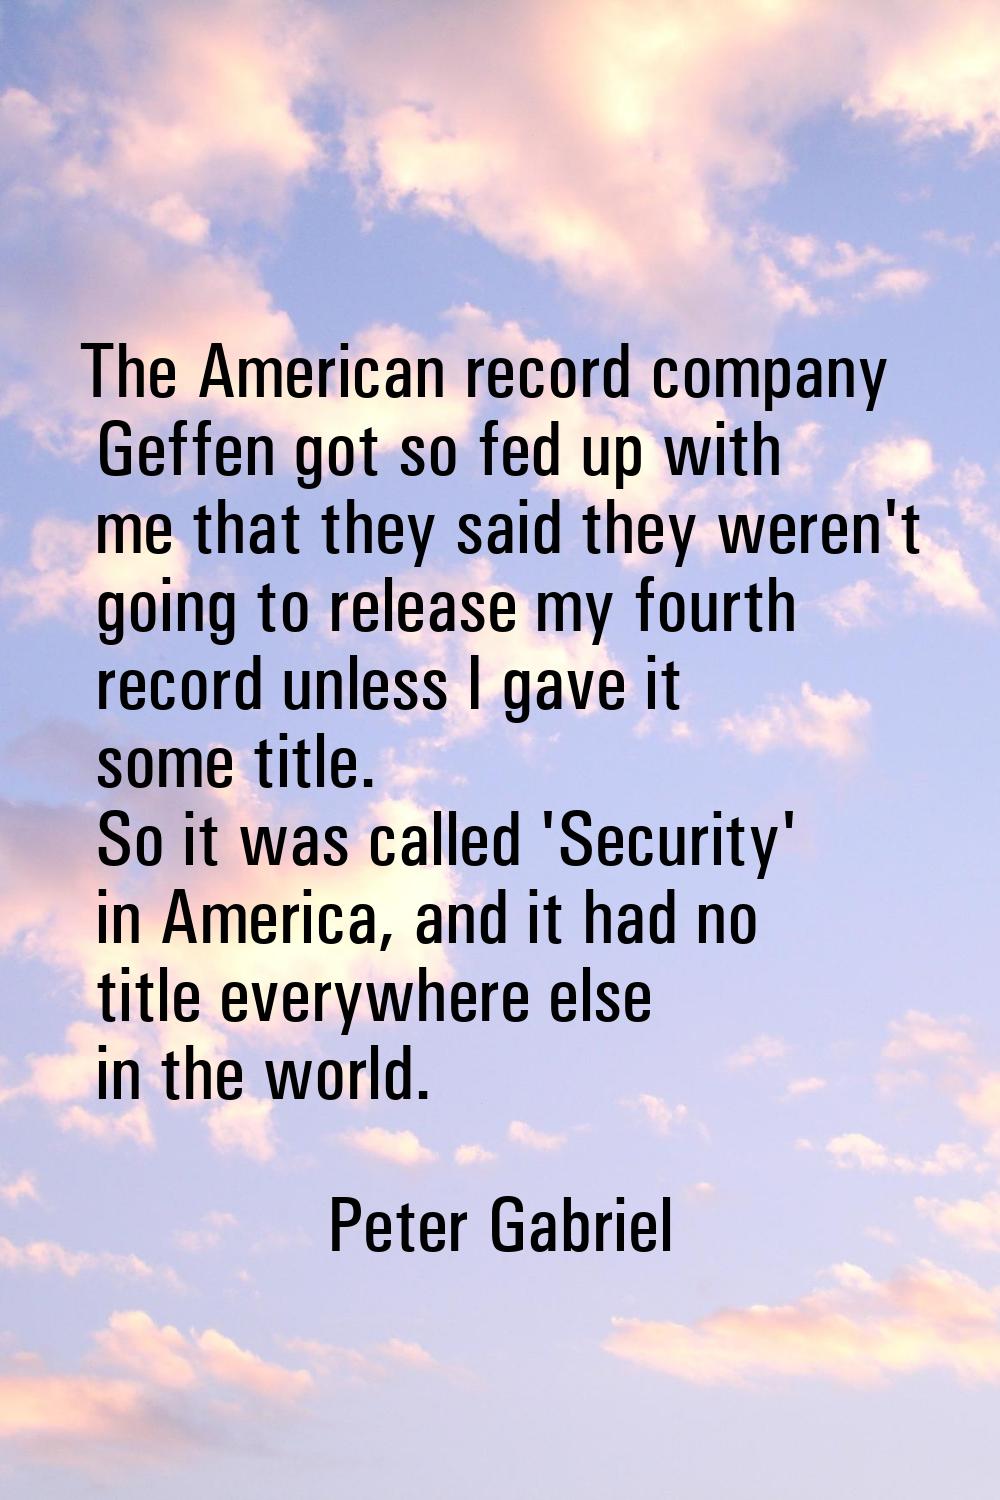 The American record company Geffen got so fed up with me that they said they weren't going to relea